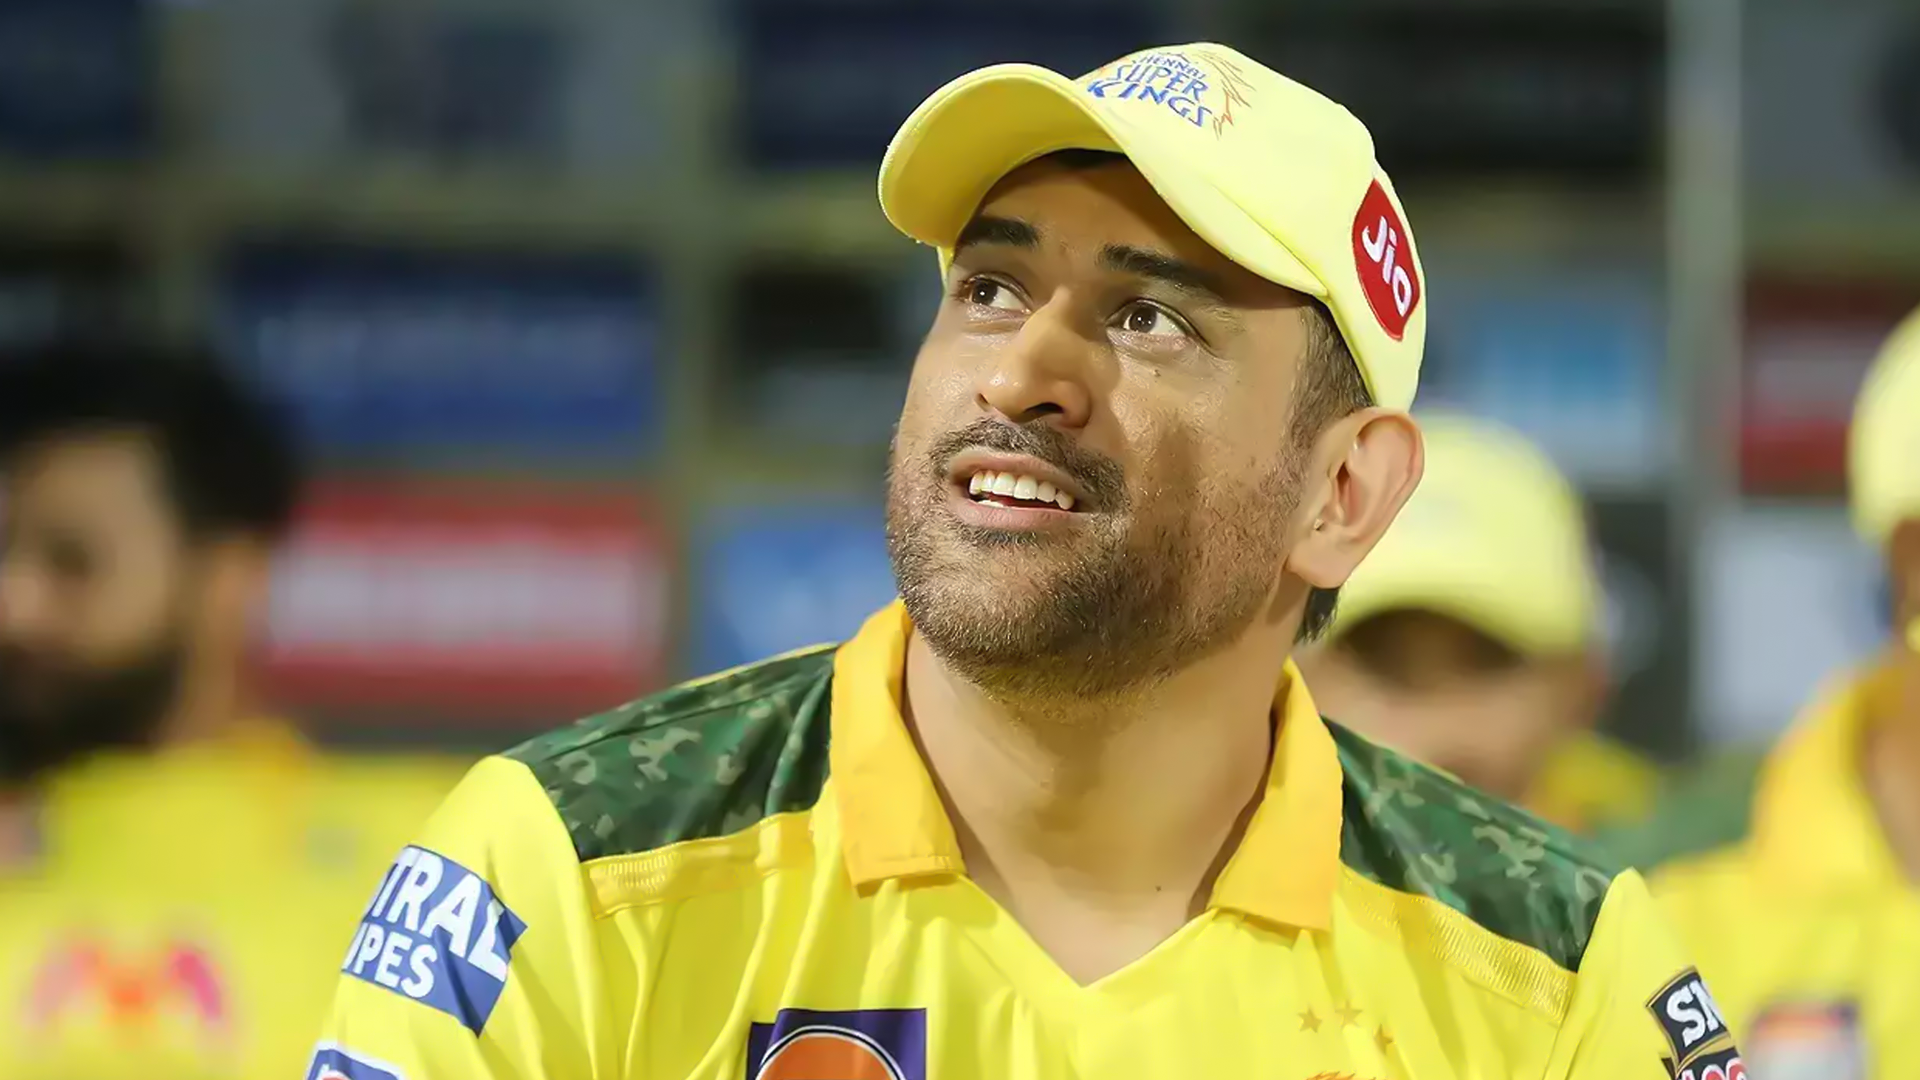 Will Dhoni Retire After IPL 2023? Deepak Chahar Comes With An Interesting Statement